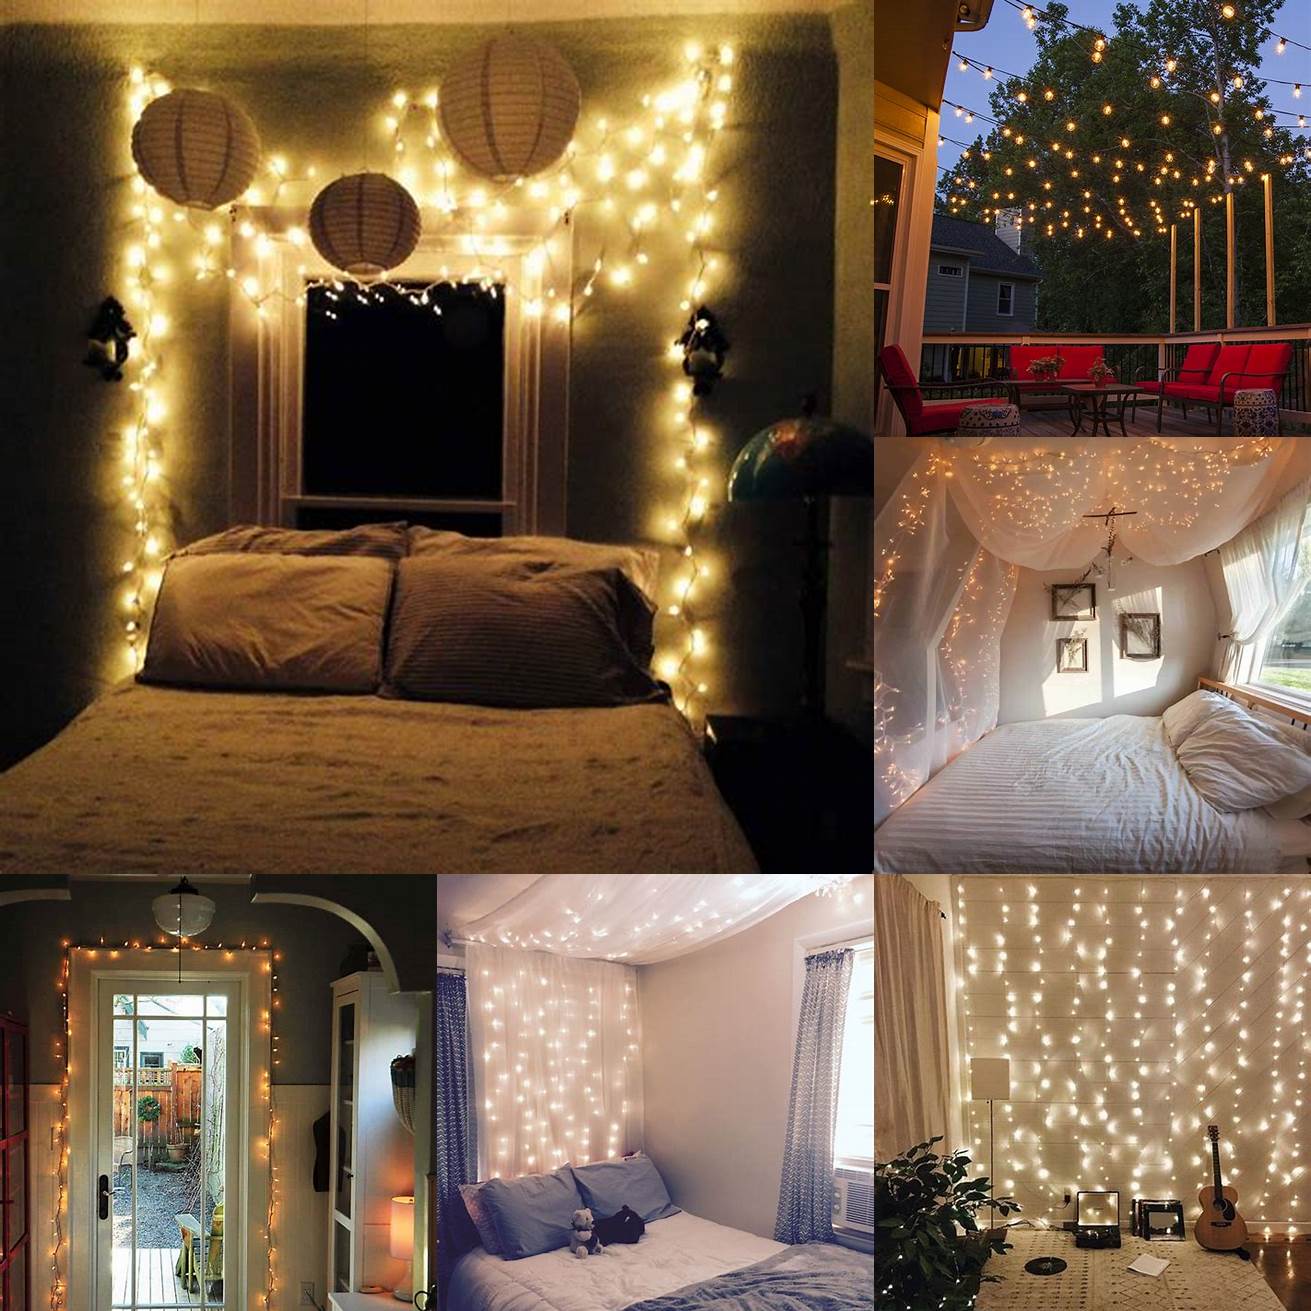 String lights are a great way to add a cozy whimsical touch to any room